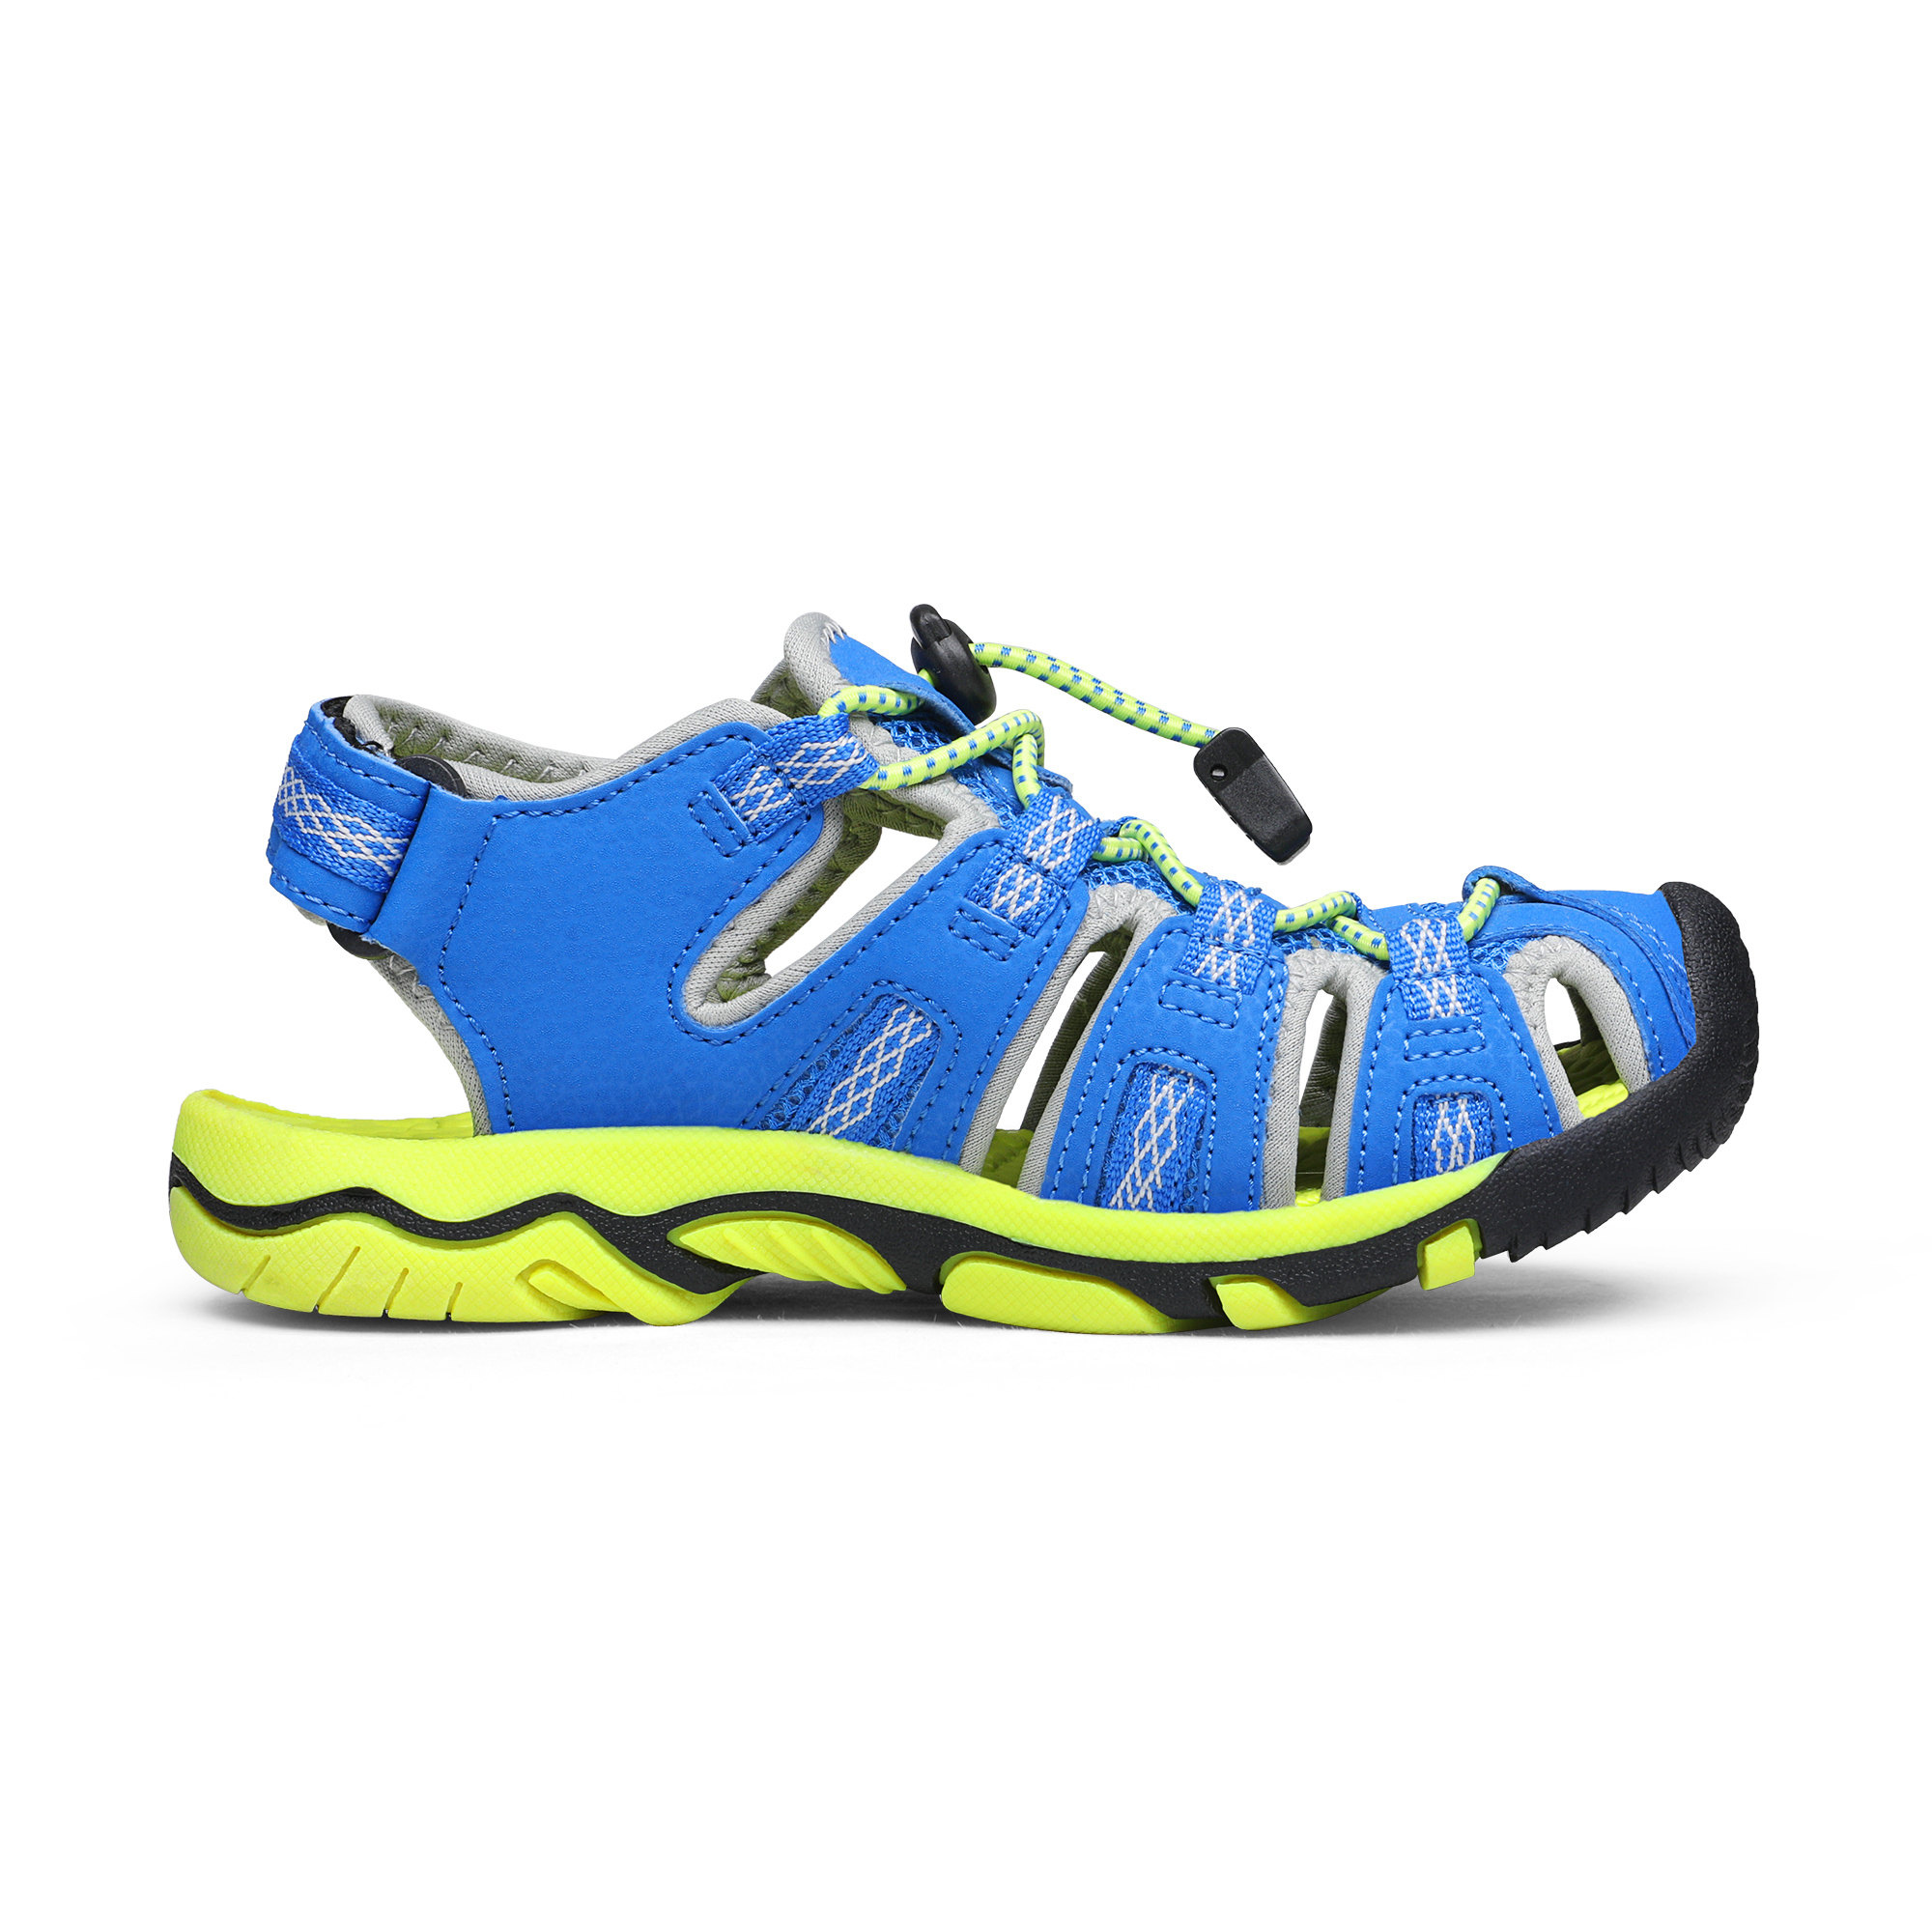 Dream Pairs Kids Summer Athletic Sandals Boys Girls School Outdoor Sports Sandals Walking Shoes 160912-K ROYAL/BLUE/GREY/NEON/GREEN Size 12 - image 2 of 5